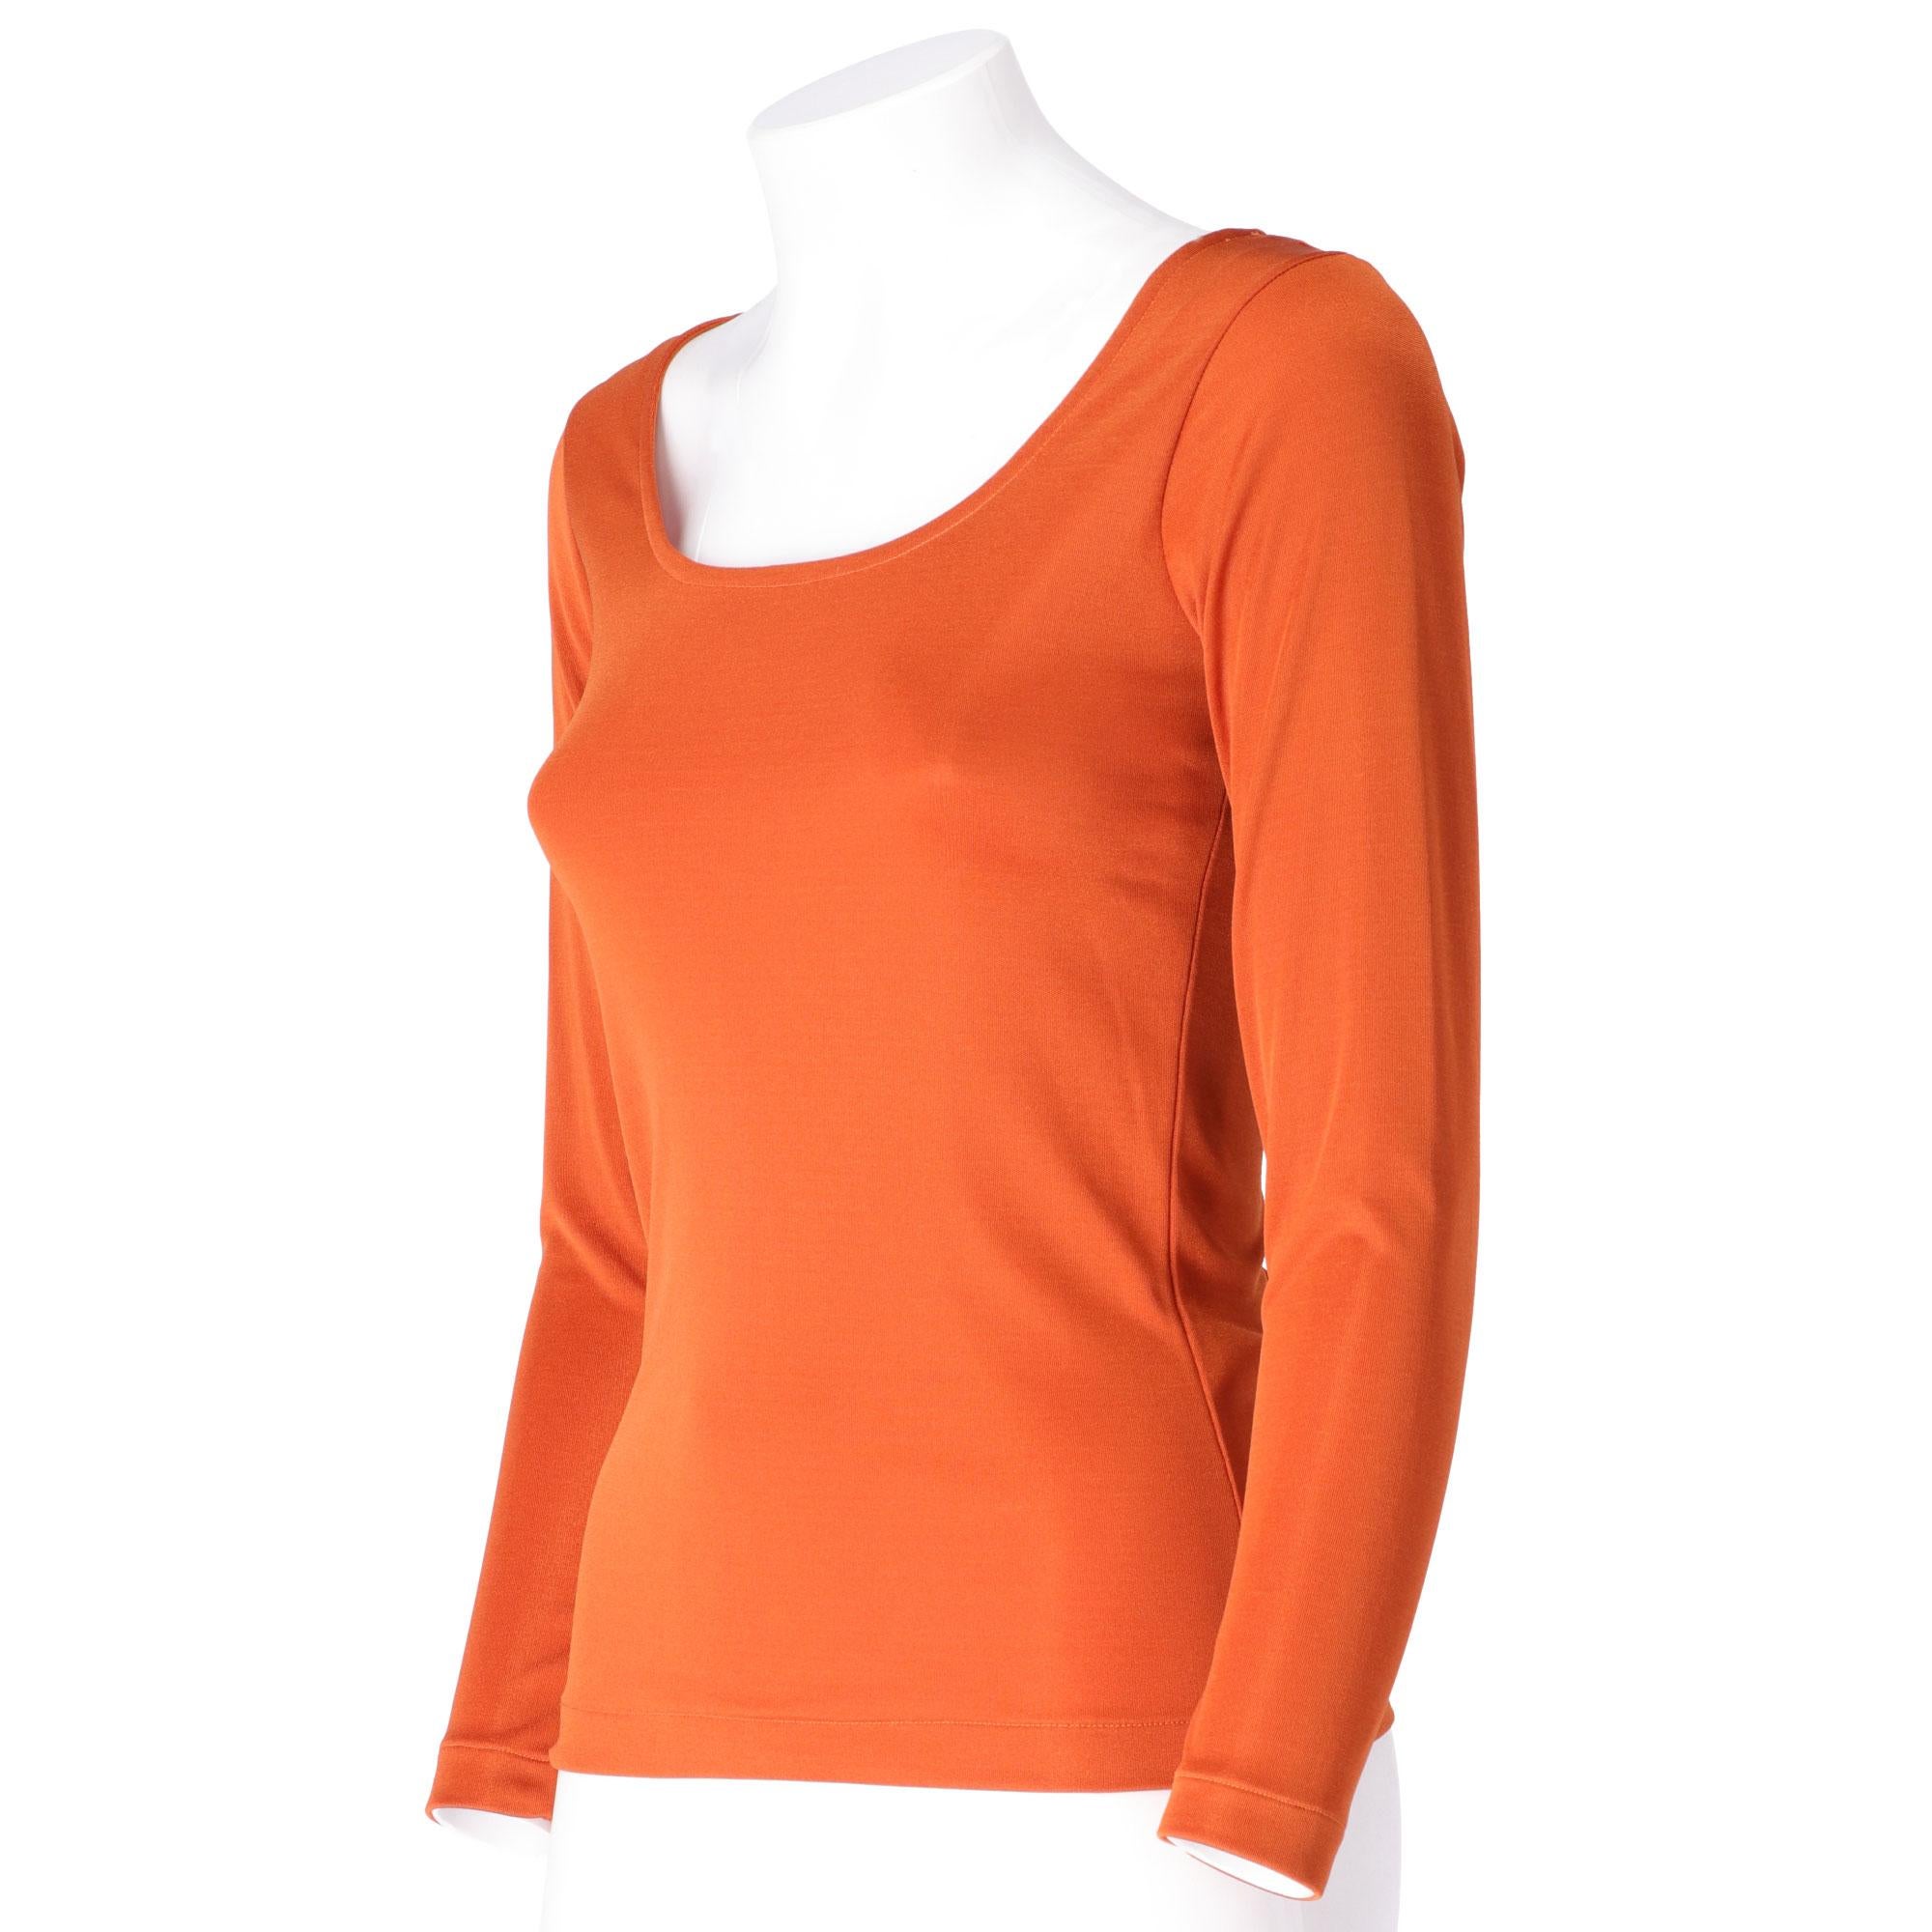 Yves Saint Laurent top in rust-colored synthetic stretch fabric, wide round neckline and long sleeves; slim fit.
Year: 70s

Made in France

Size: 38 FR

Linear measures

Height: 57 cm
Bust: 35 cm
Shoulders: 36 cm
Sleeves: 54 cm